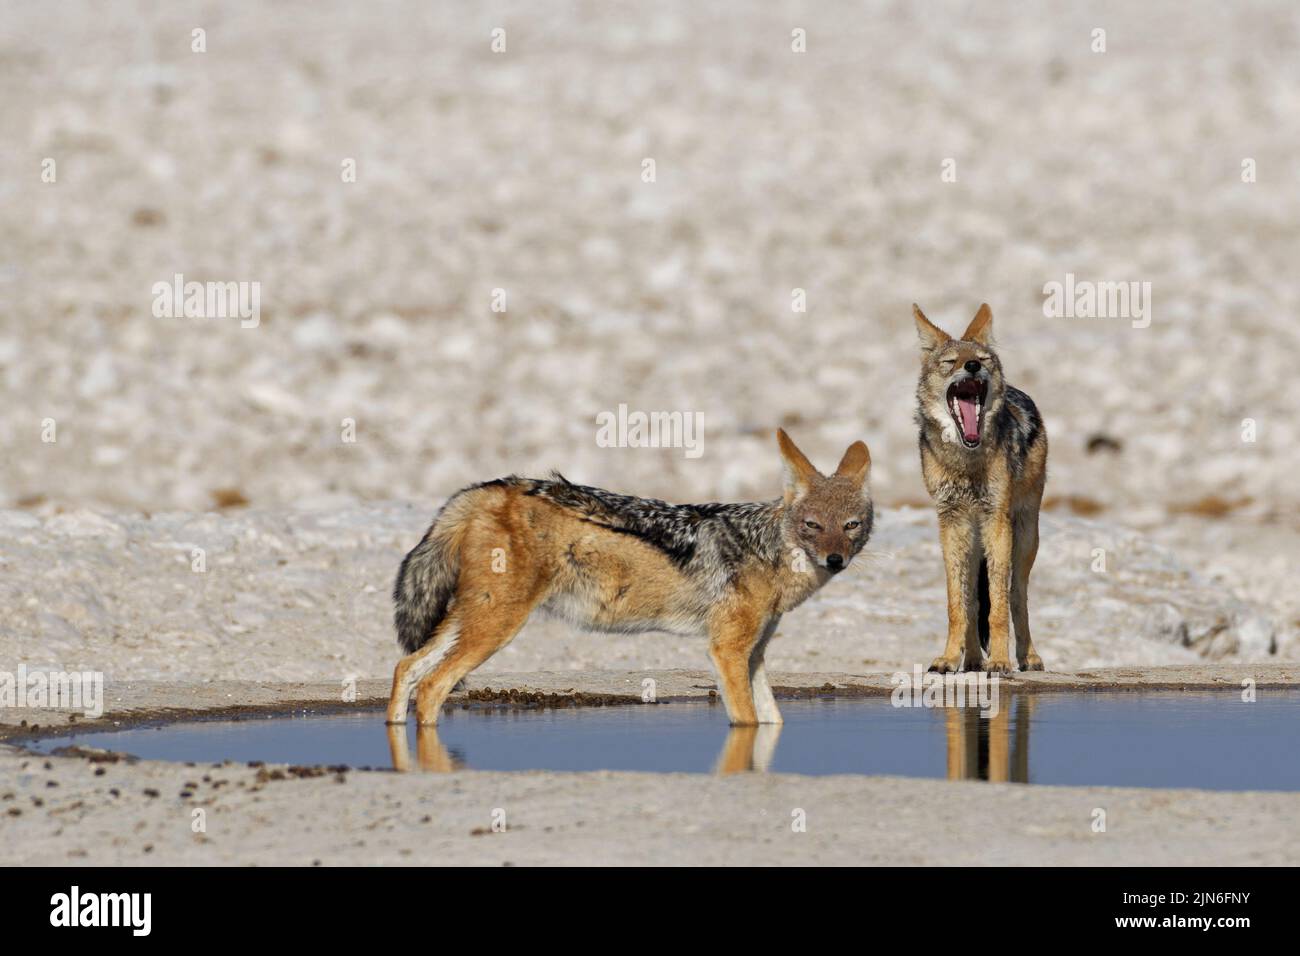 Black-backed jackals (Canis mesomelas), two adults at waterhole, one in water, alert, the other yawning, Etosha National Park, Namibia, Africa Stock Photo